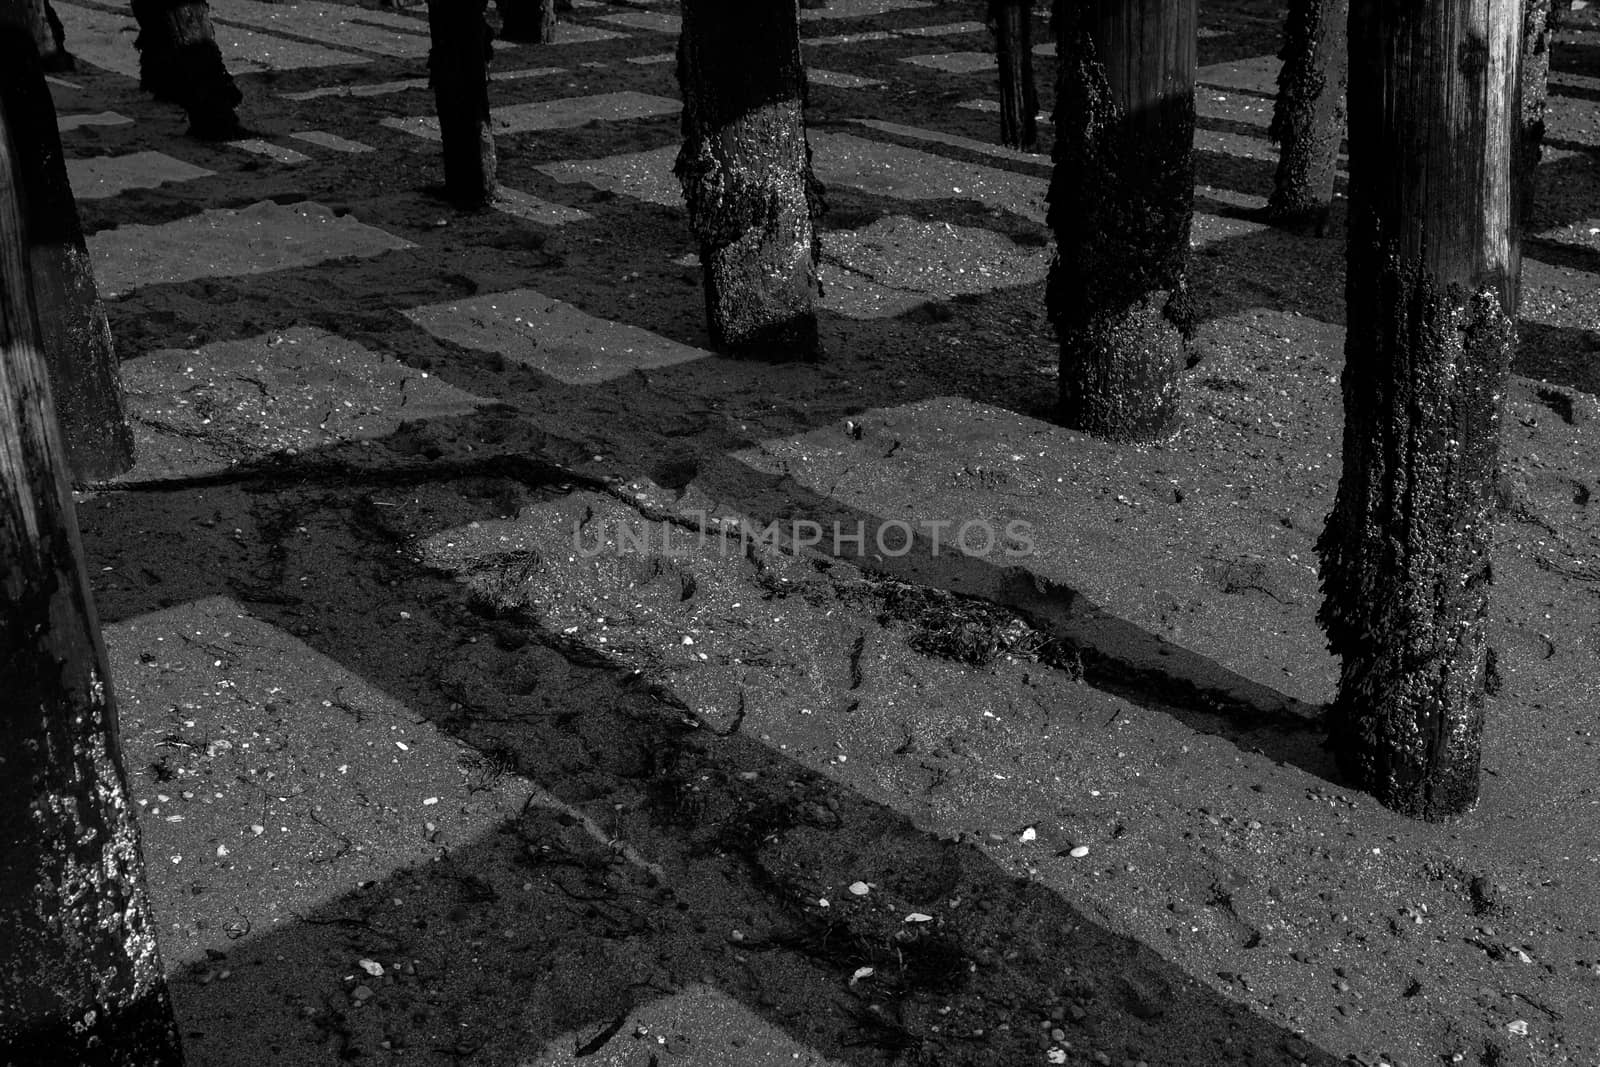 Abstract square patterns of shadows of wharf posts on sand below by brians101